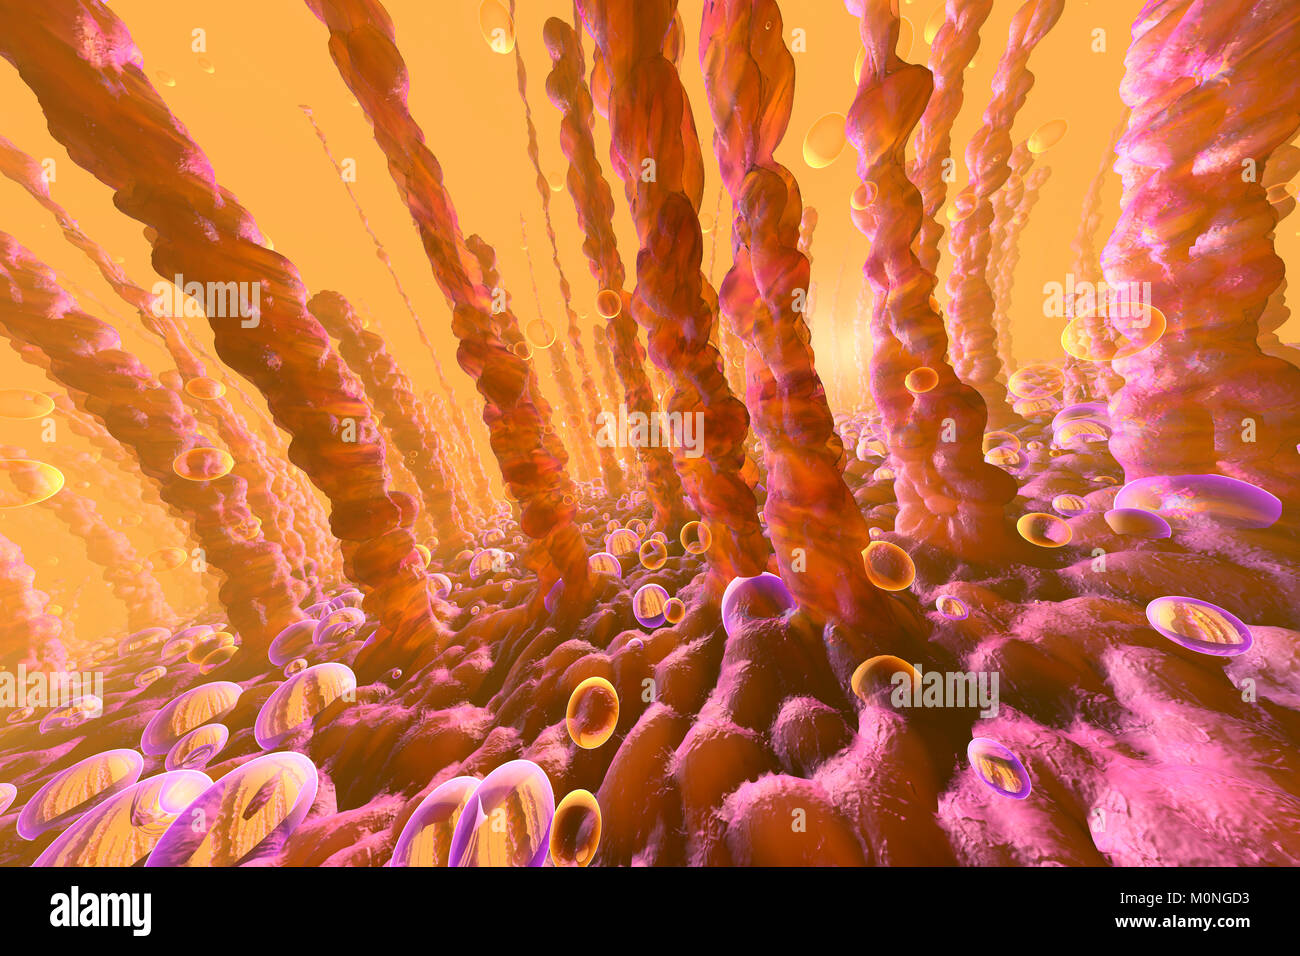 3D Illustration of lung or liver cells with oxygen bubbles floating within Stock Photo